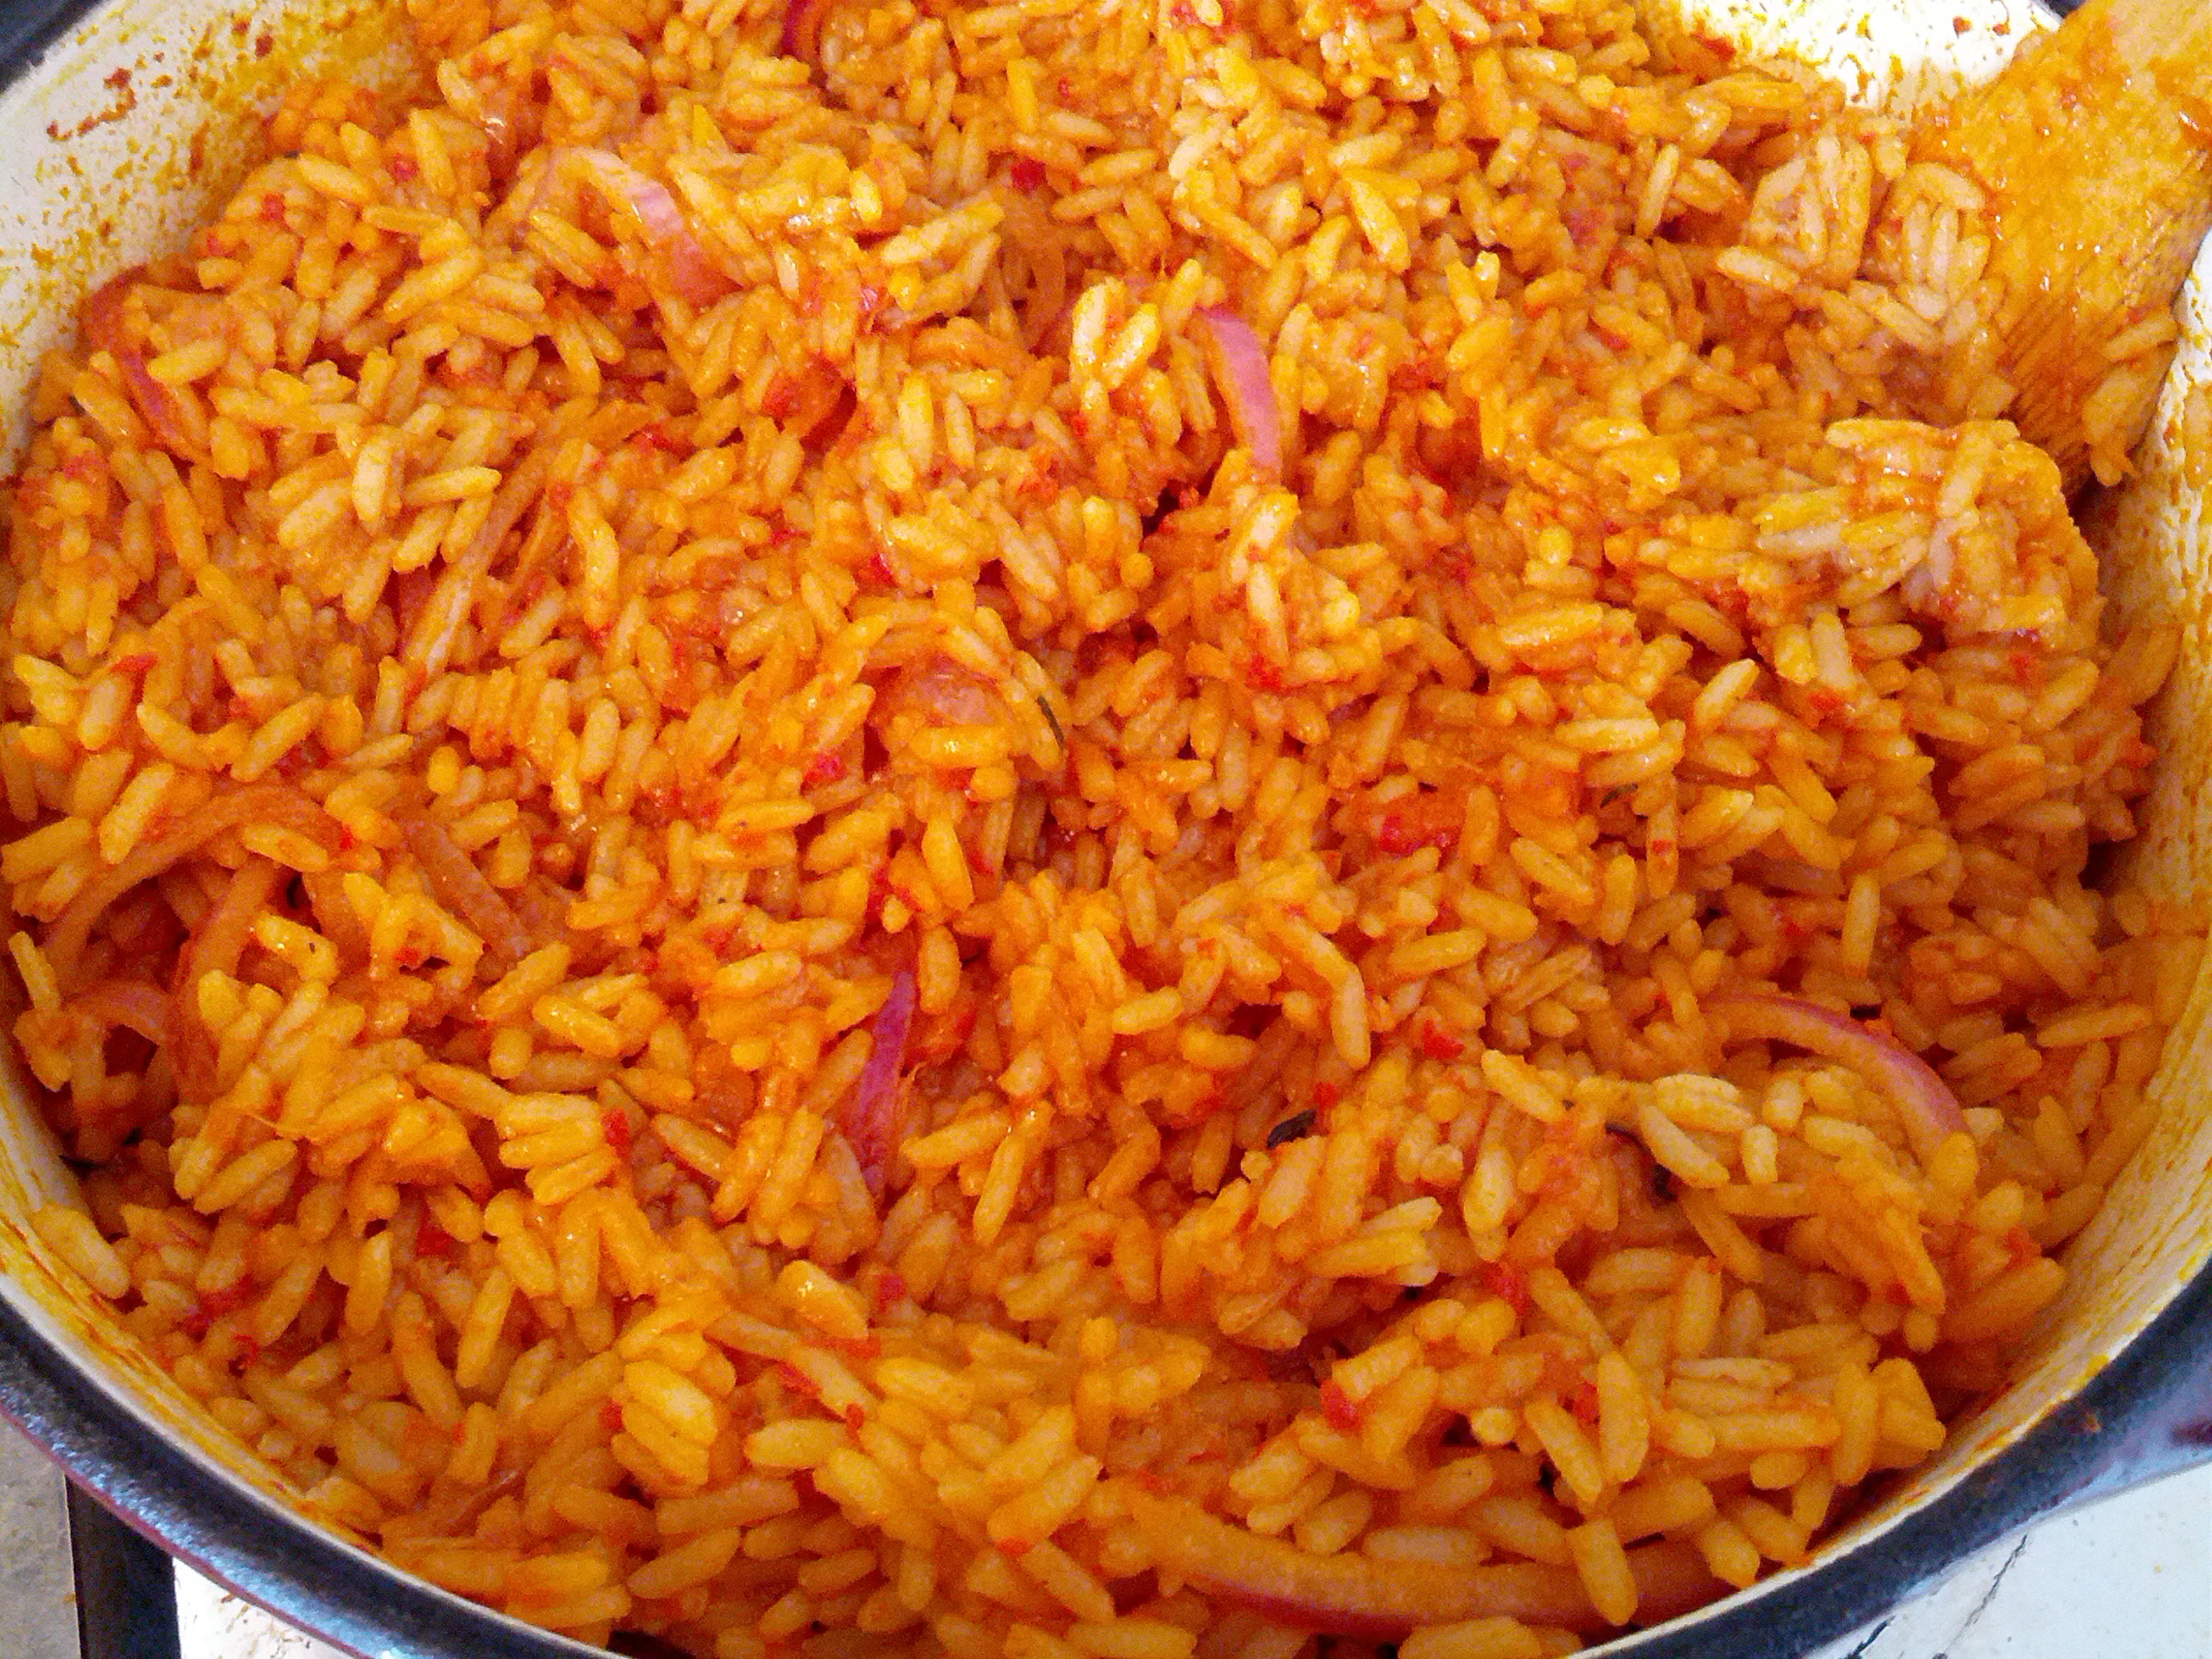 a close up of jollof rice, rice cooked with tomato and thus with a reddish color